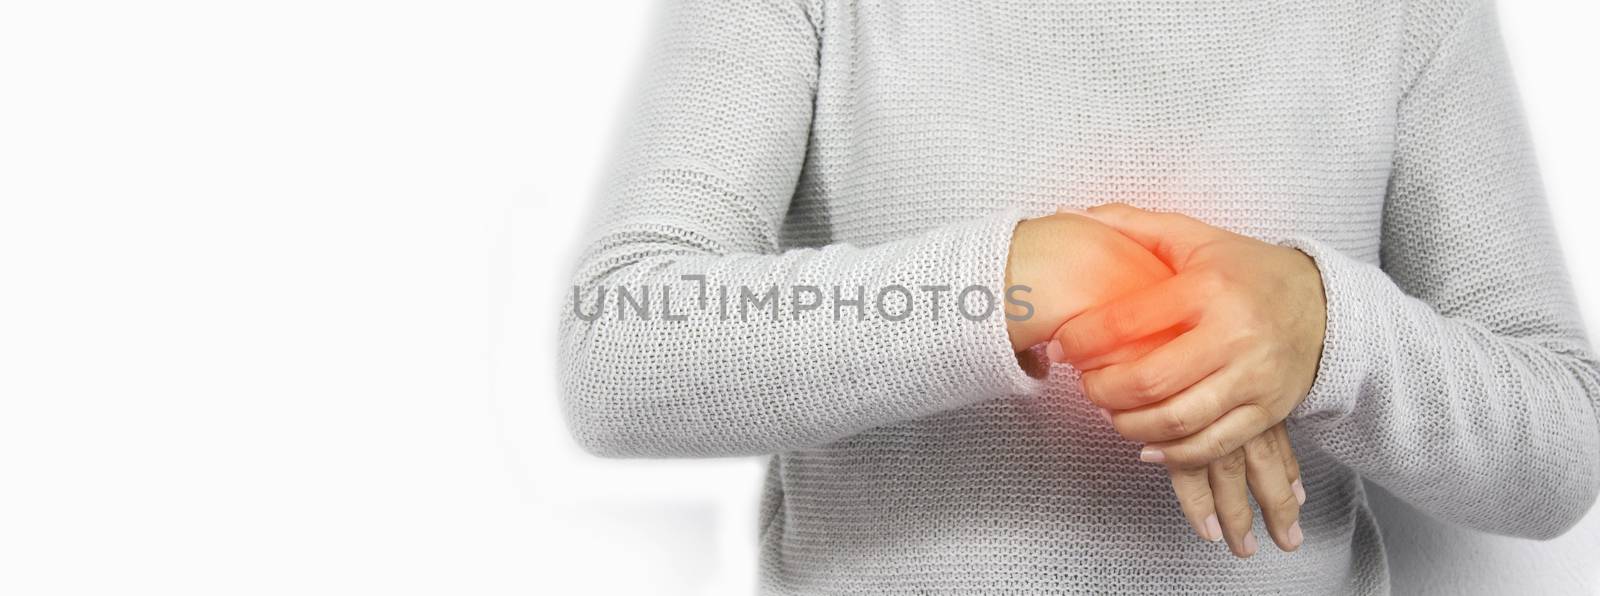 Young women hold her wrist with suffering from arthritis or Carpal tunnel syndrome from work, isolated on white background. by TEERASAK